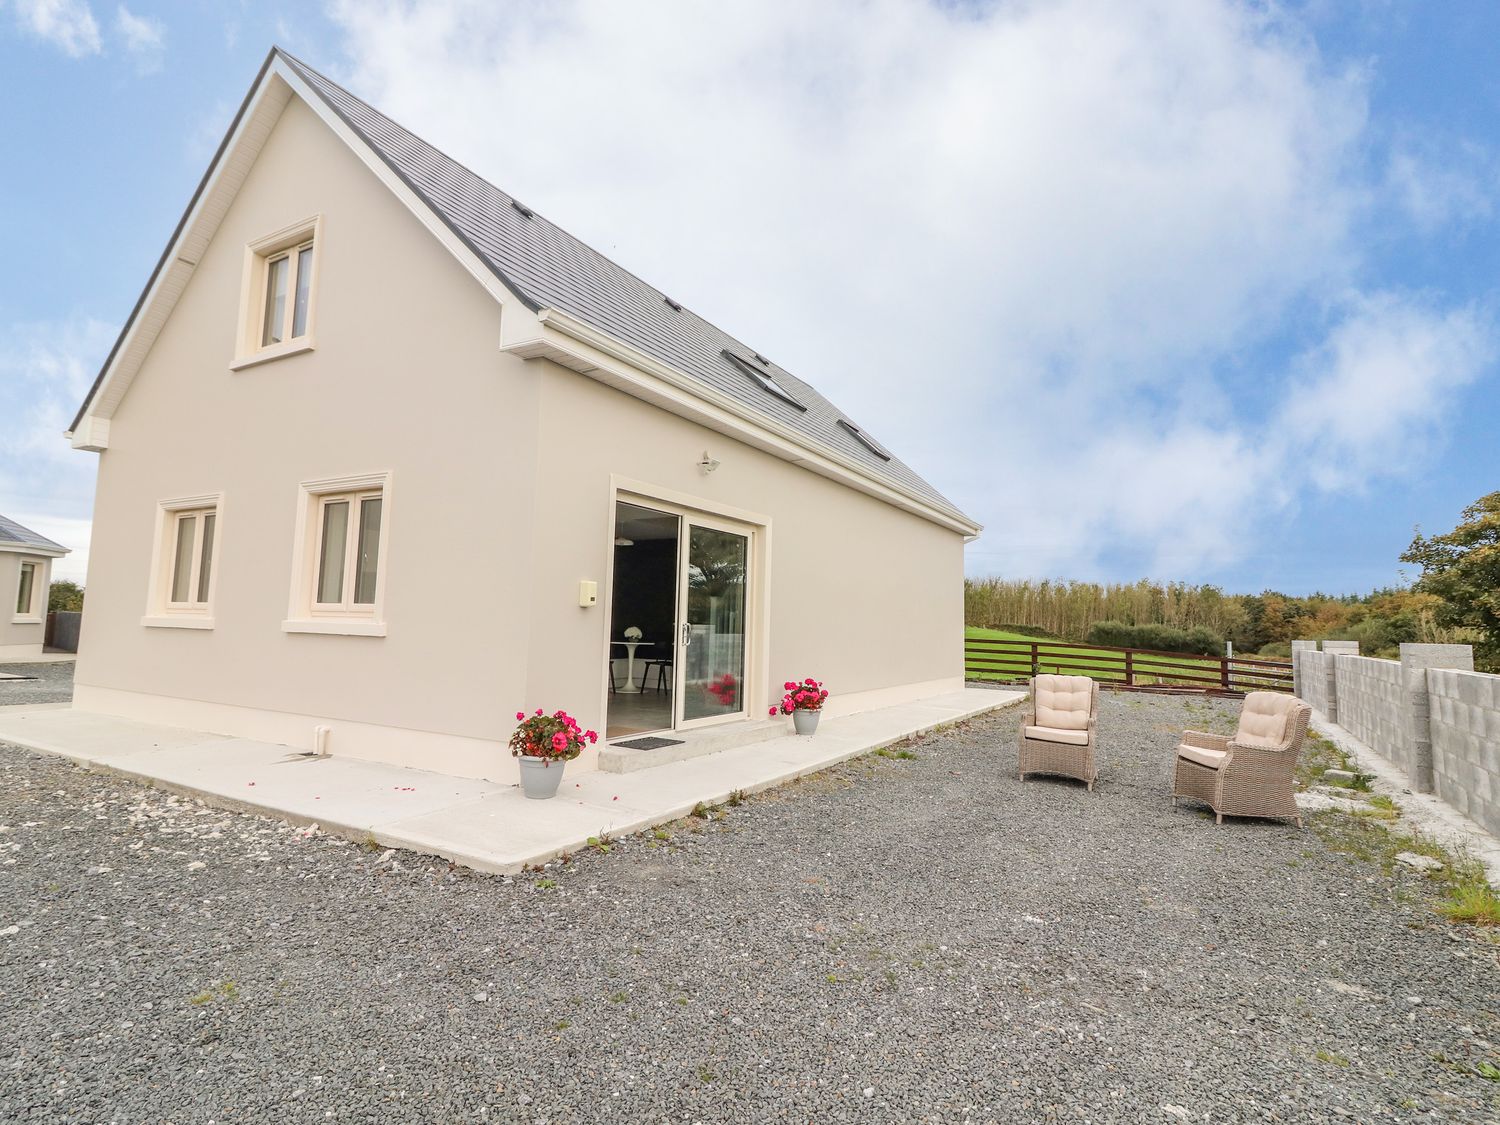 Woodview Apartment - County Clare - 1115951 - photo 1